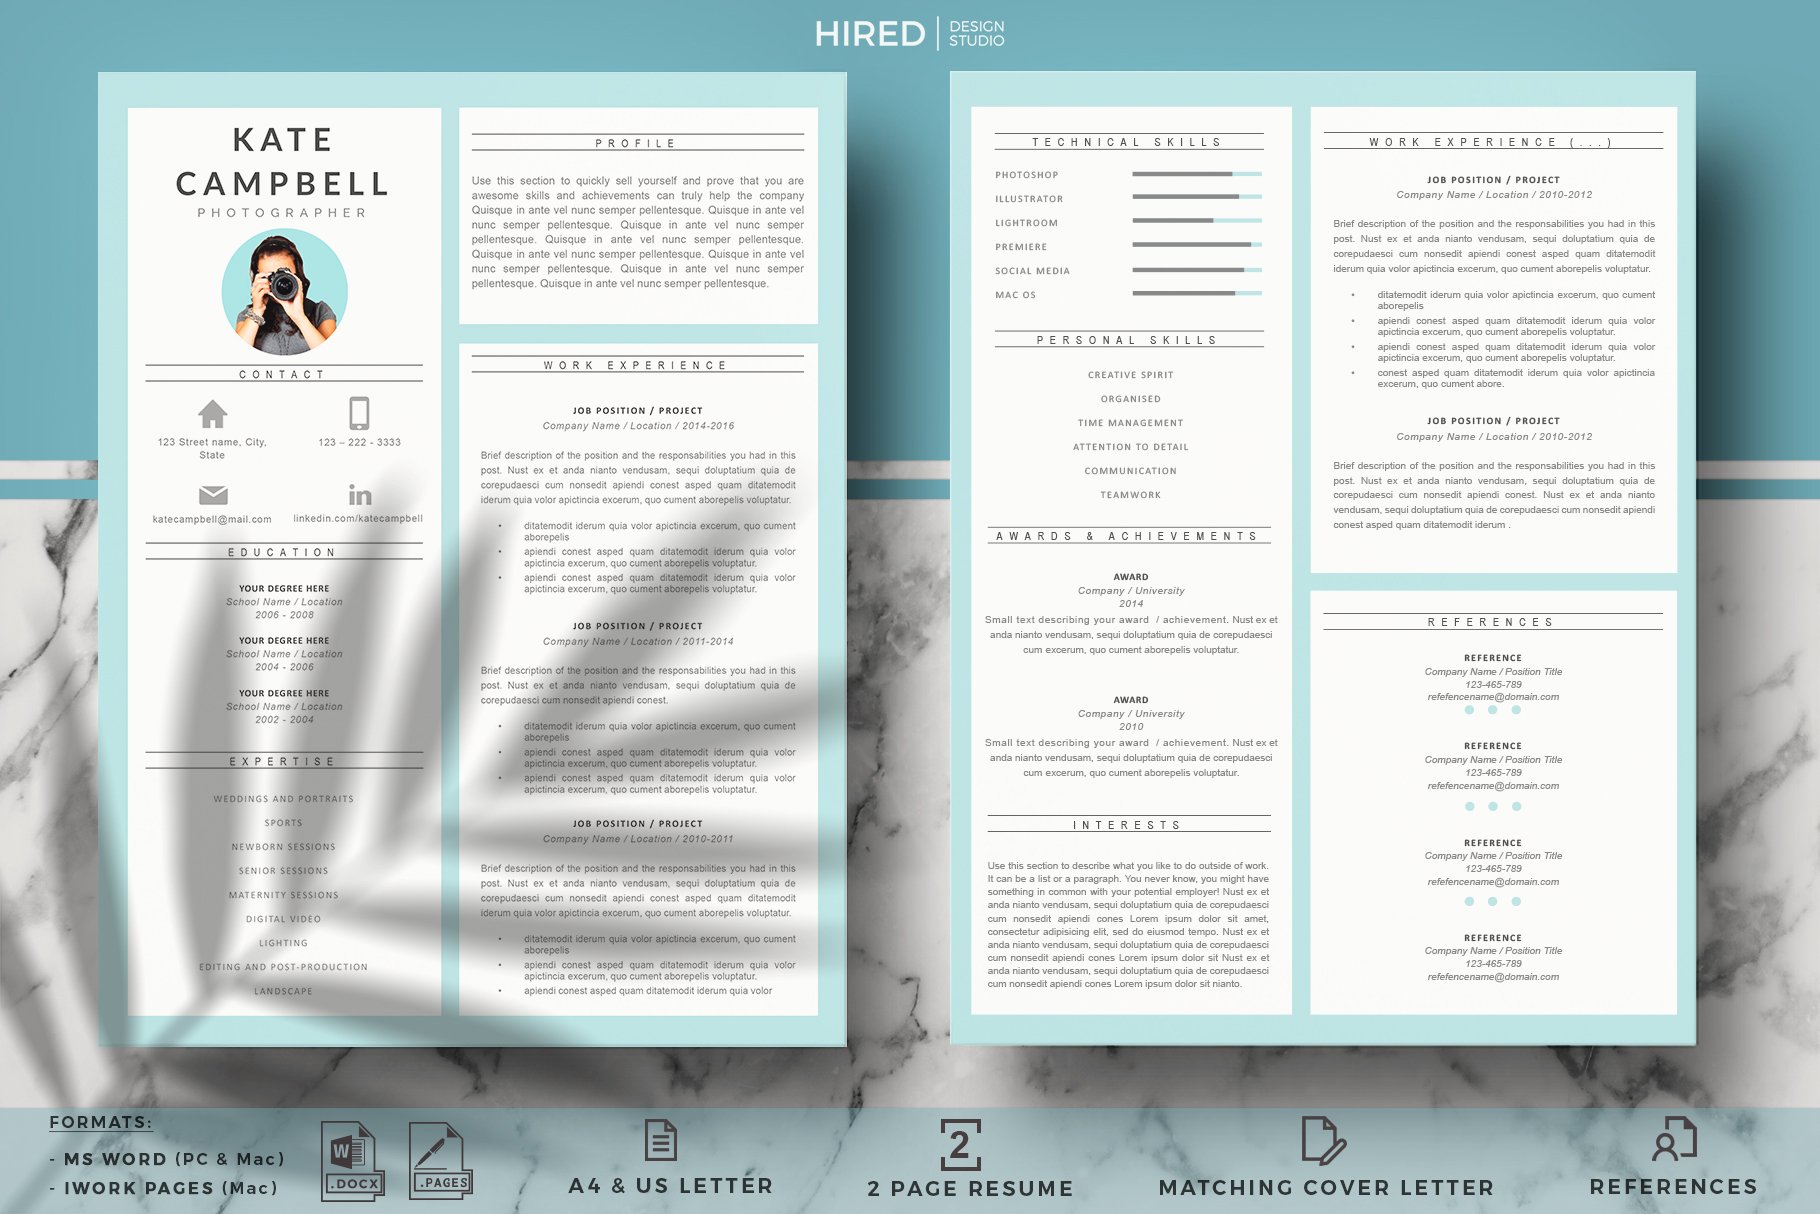 Creative CV + Resume Writing guide preview image.